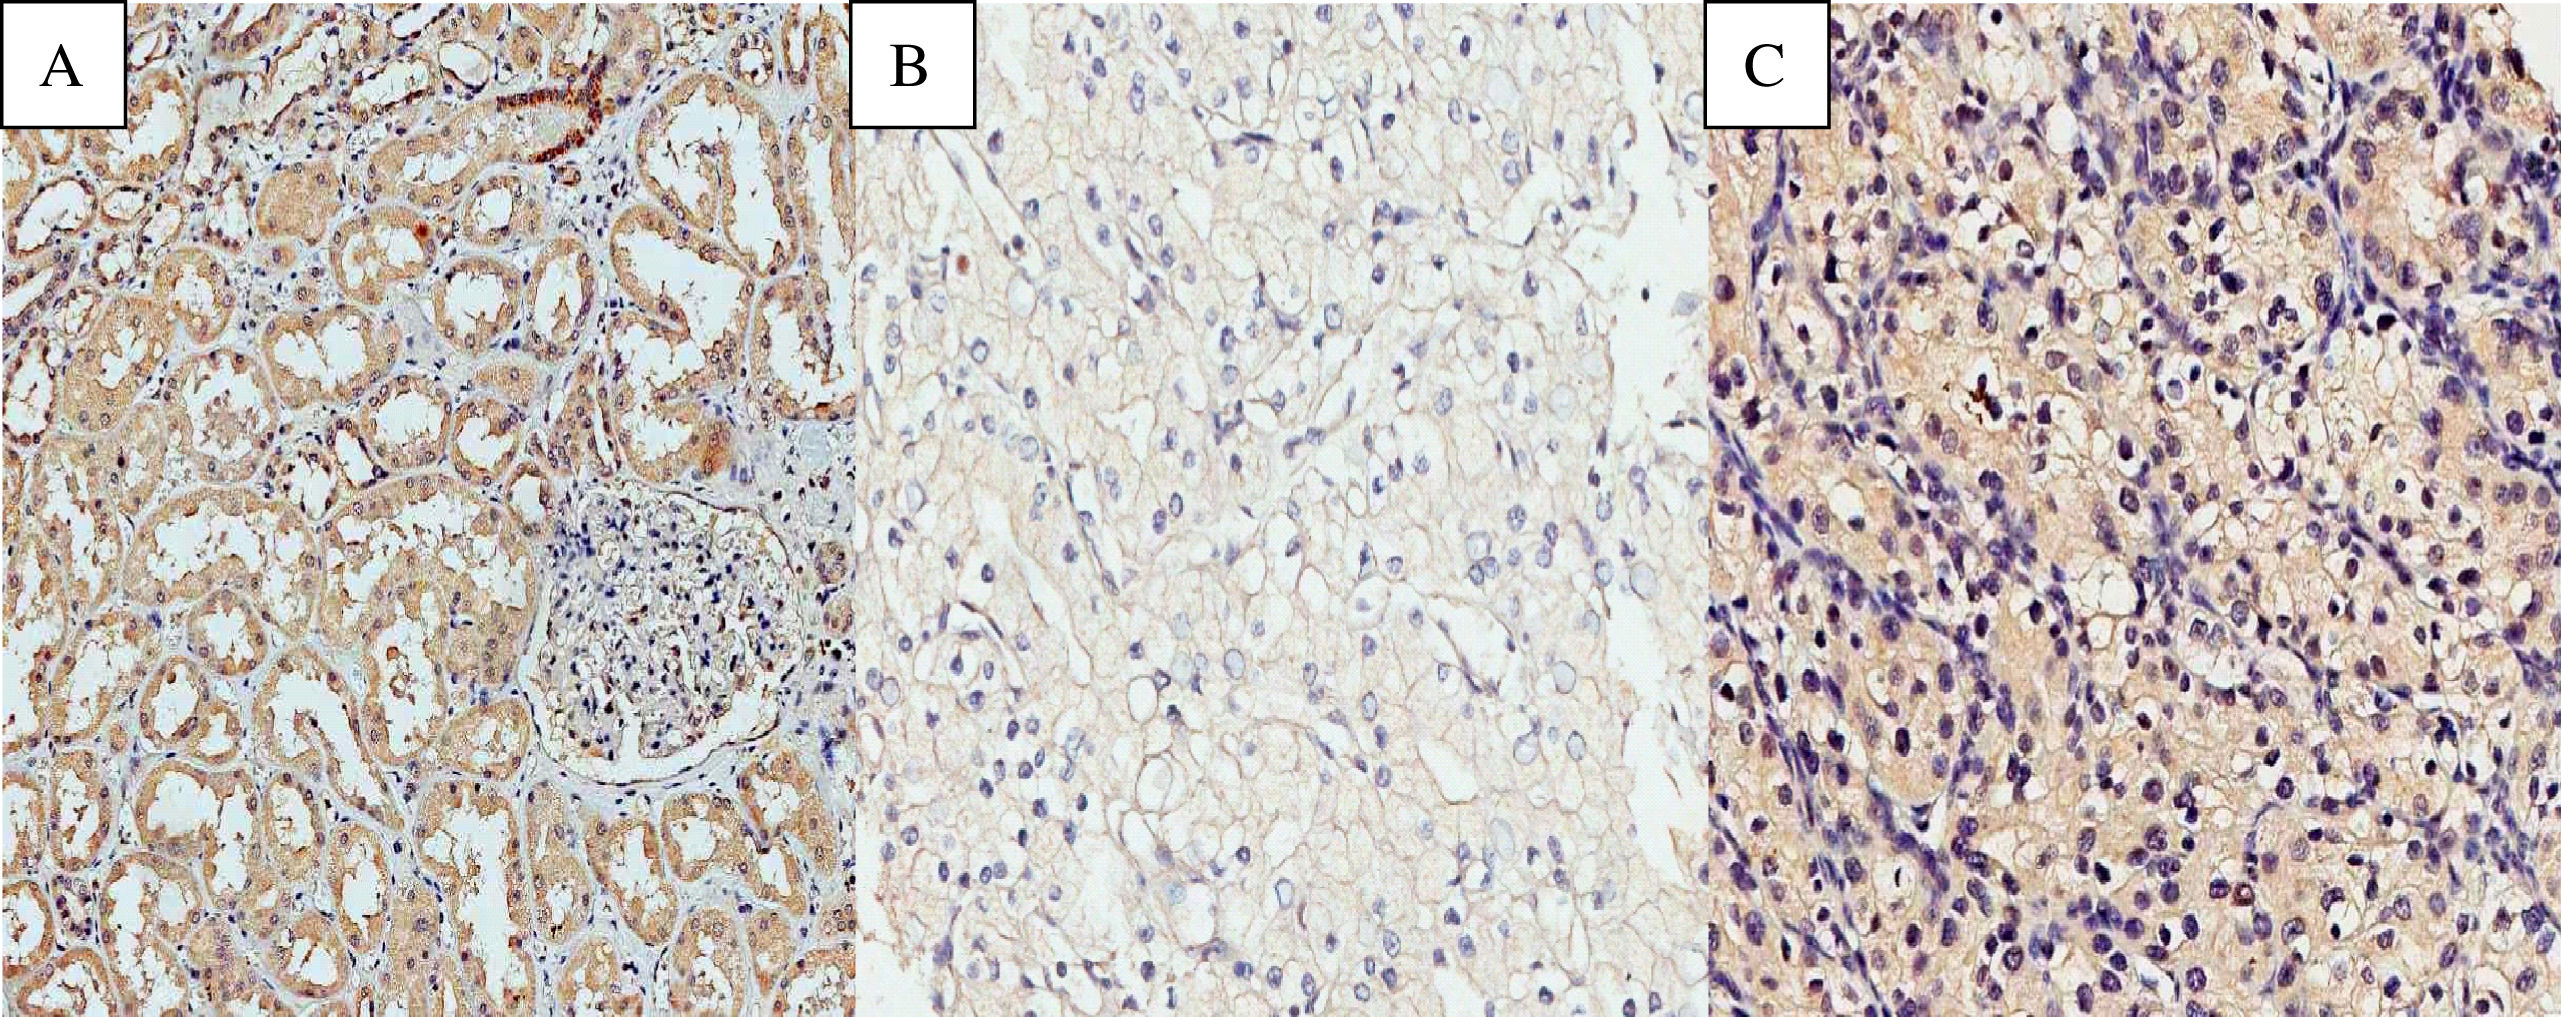 Photomicrographs of immunohistochemical expression of EPO. (A) Positive expression of EPO in non-neoplastic renal cortex. (B) Negative expression of EPO in ccRCC. (C) Positive expression of EPO in ccRCC. Original magnification: 400 X.